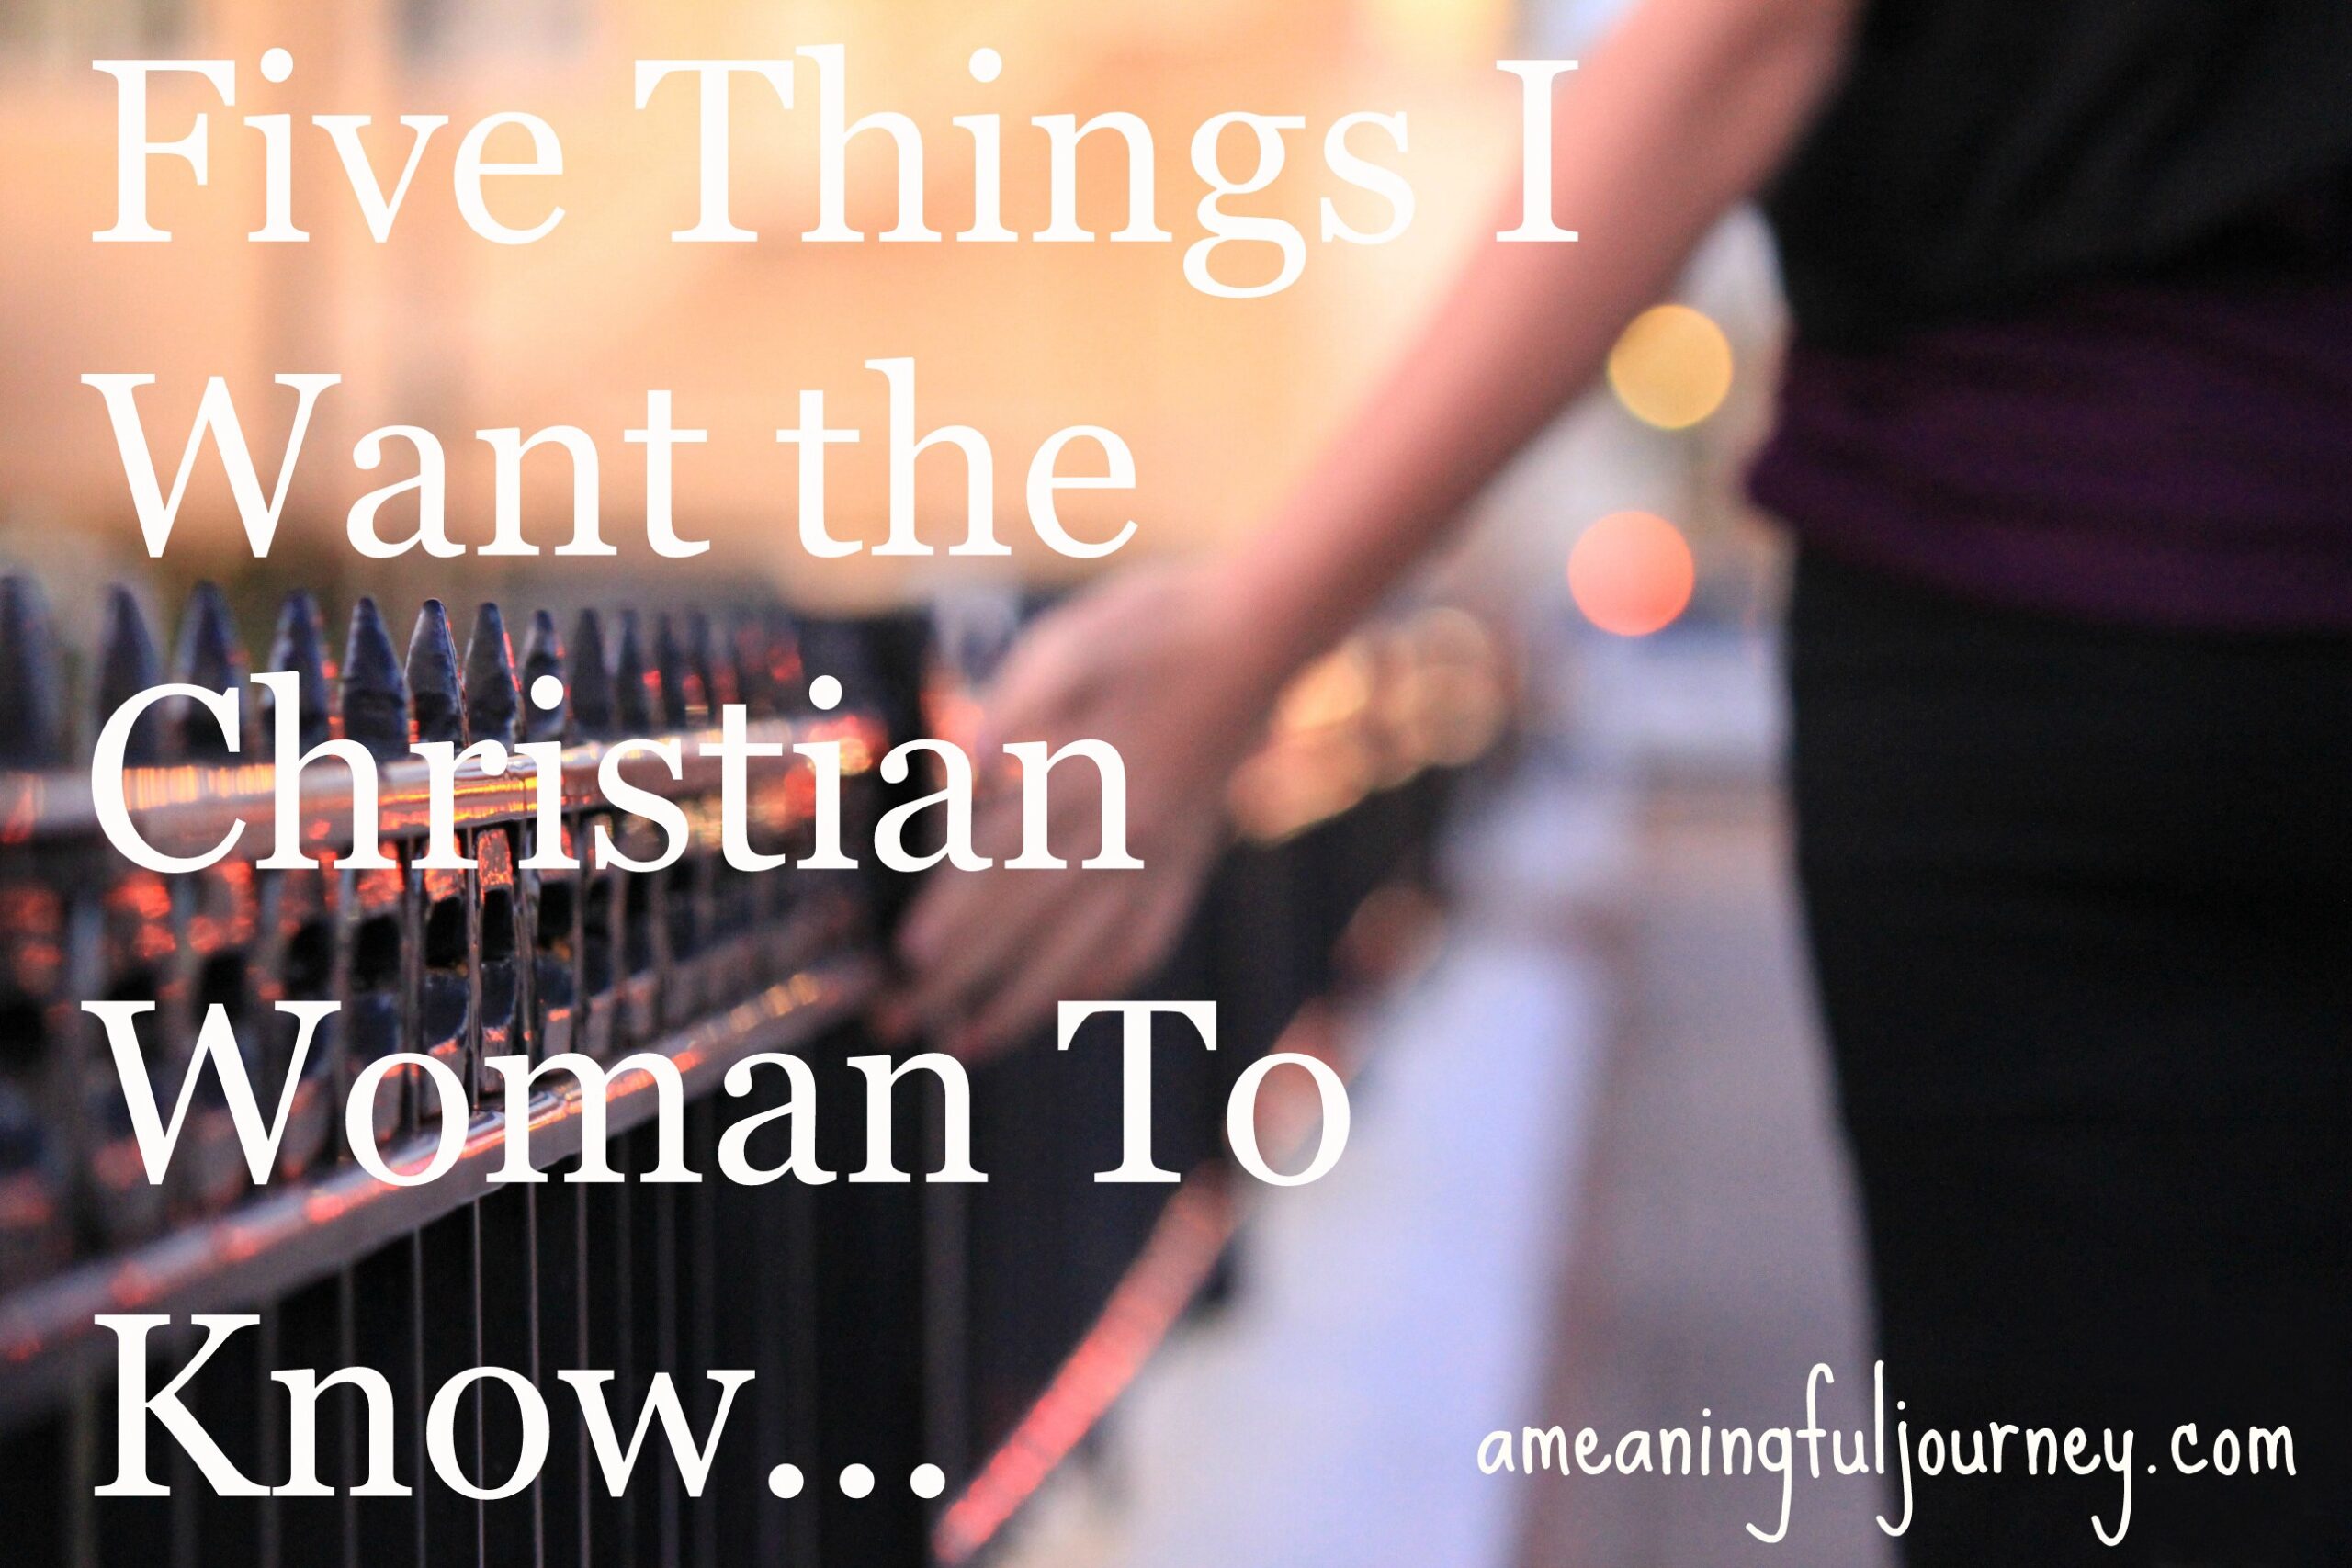 Five Things I Want The Christian Woman To Know…